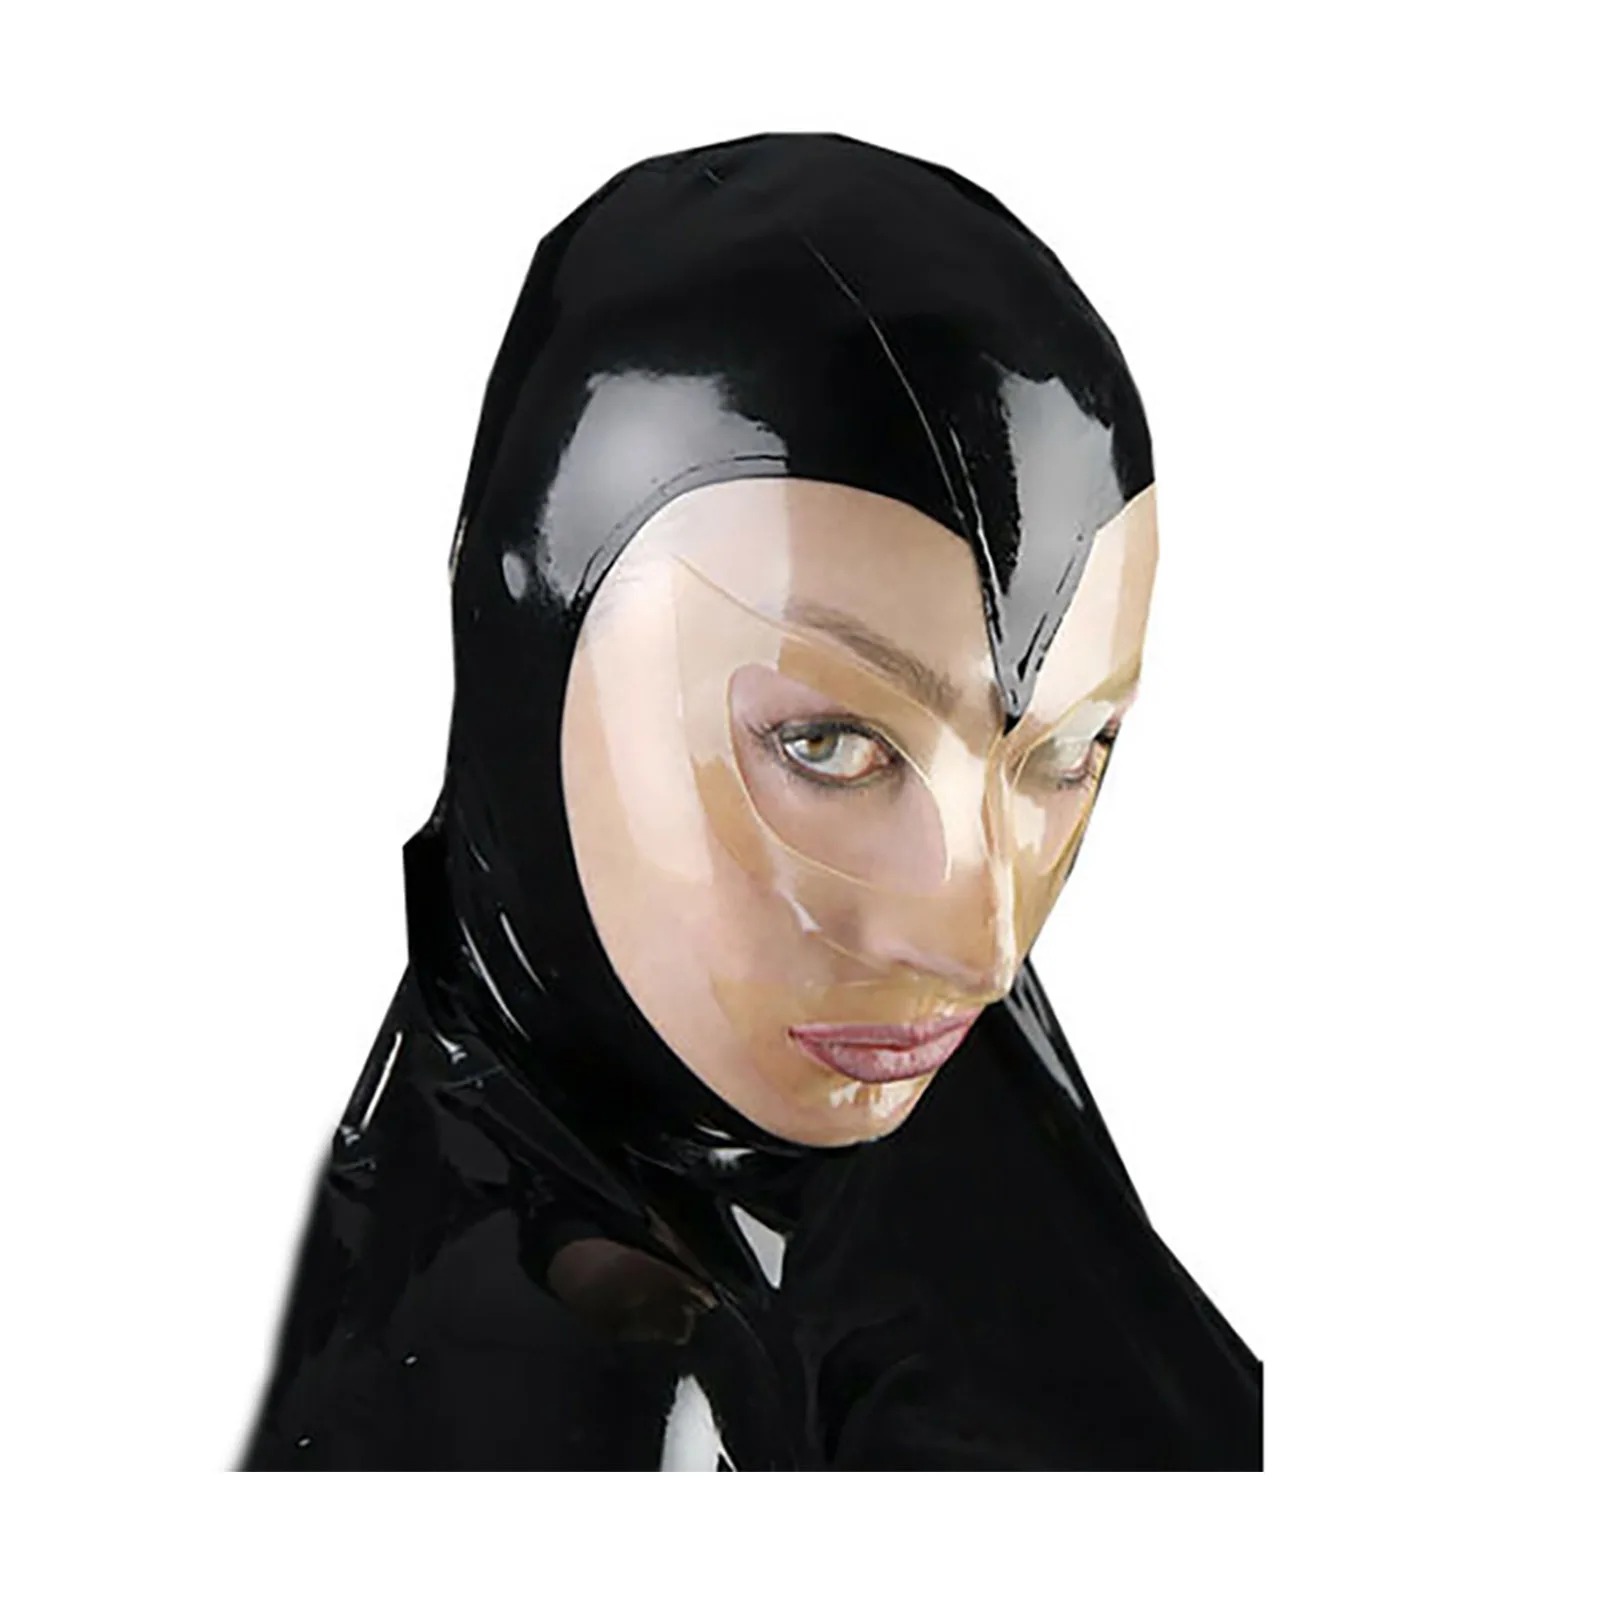 MONNIK Latex Mask Rubber Fashion Hood Two Color Open Eyes&Mouth with Rear Zipper Handmade for Unisex Bodysuit Cosplay Party